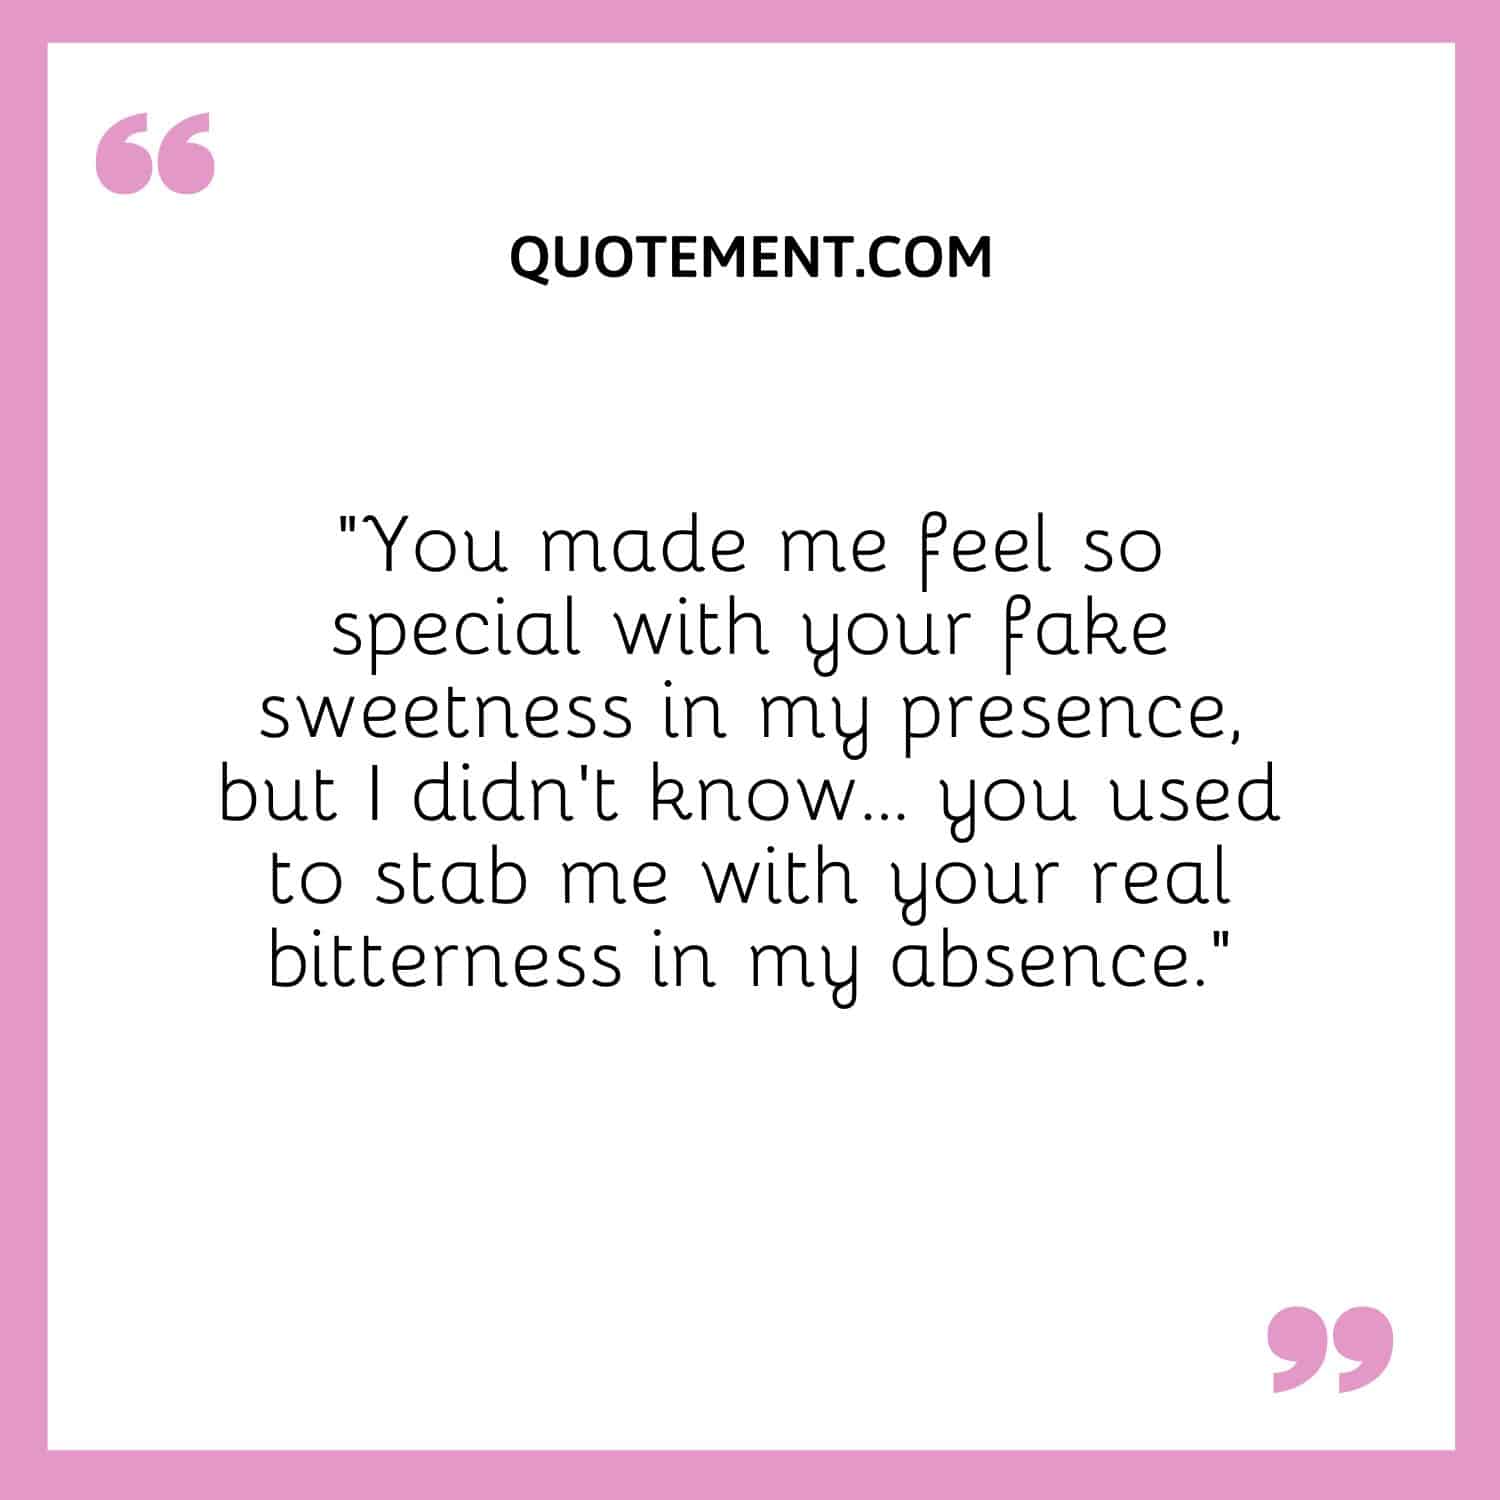 “You made me feel so special with your fake sweetness in my presence, but I didn't know... you used to stab me with your real bitterness in my absence.”